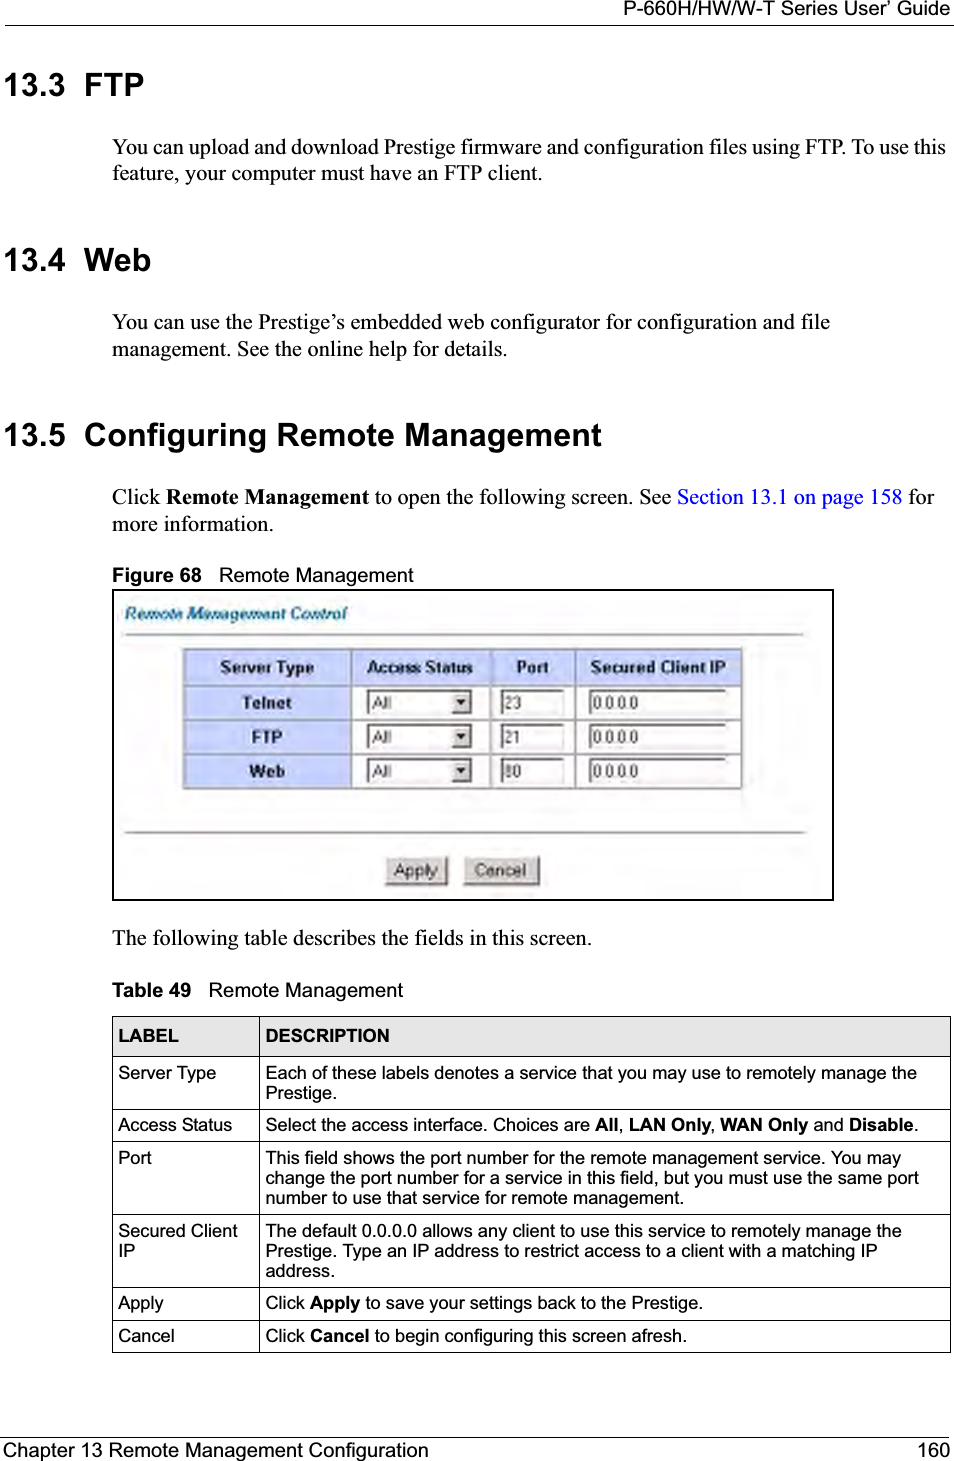 P-660H/HW/W-T Series User’ GuideChapter 13 Remote Management Configuration 16013.3  FTPYou can upload and download Prestige firmware and configuration files using FTP. To use this feature, your computer must have an FTP client.13.4  WebYou can use the Prestige’s embedded web configurator for configuration and file management. See the online help for details.13.5  Configuring Remote Management Click Remote Management to open the following screen. See Section 13.1 on page 158 for more information. Figure 68   Remote ManagementThe following table describes the fields in this screen.Table 49   Remote ManagementLABEL DESCRIPTIONServer Type  Each of these labels denotes a service that you may use to remotely manage the Prestige.Access Status Select the access interface. Choices are All,LAN Only,WAN Only and Disable.Port This field shows the port number for the remote management service. You may change the port number for a service in this field, but you must use the same port number to use that service for remote management.Secured Client IPThe default 0.0.0.0 allows any client to use this service to remotely manage the Prestige. Type an IP address to restrict access to a client with a matching IP address.Apply Click Apply to save your settings back to the Prestige.Cancel Click Cancel to begin configuring this screen afresh.